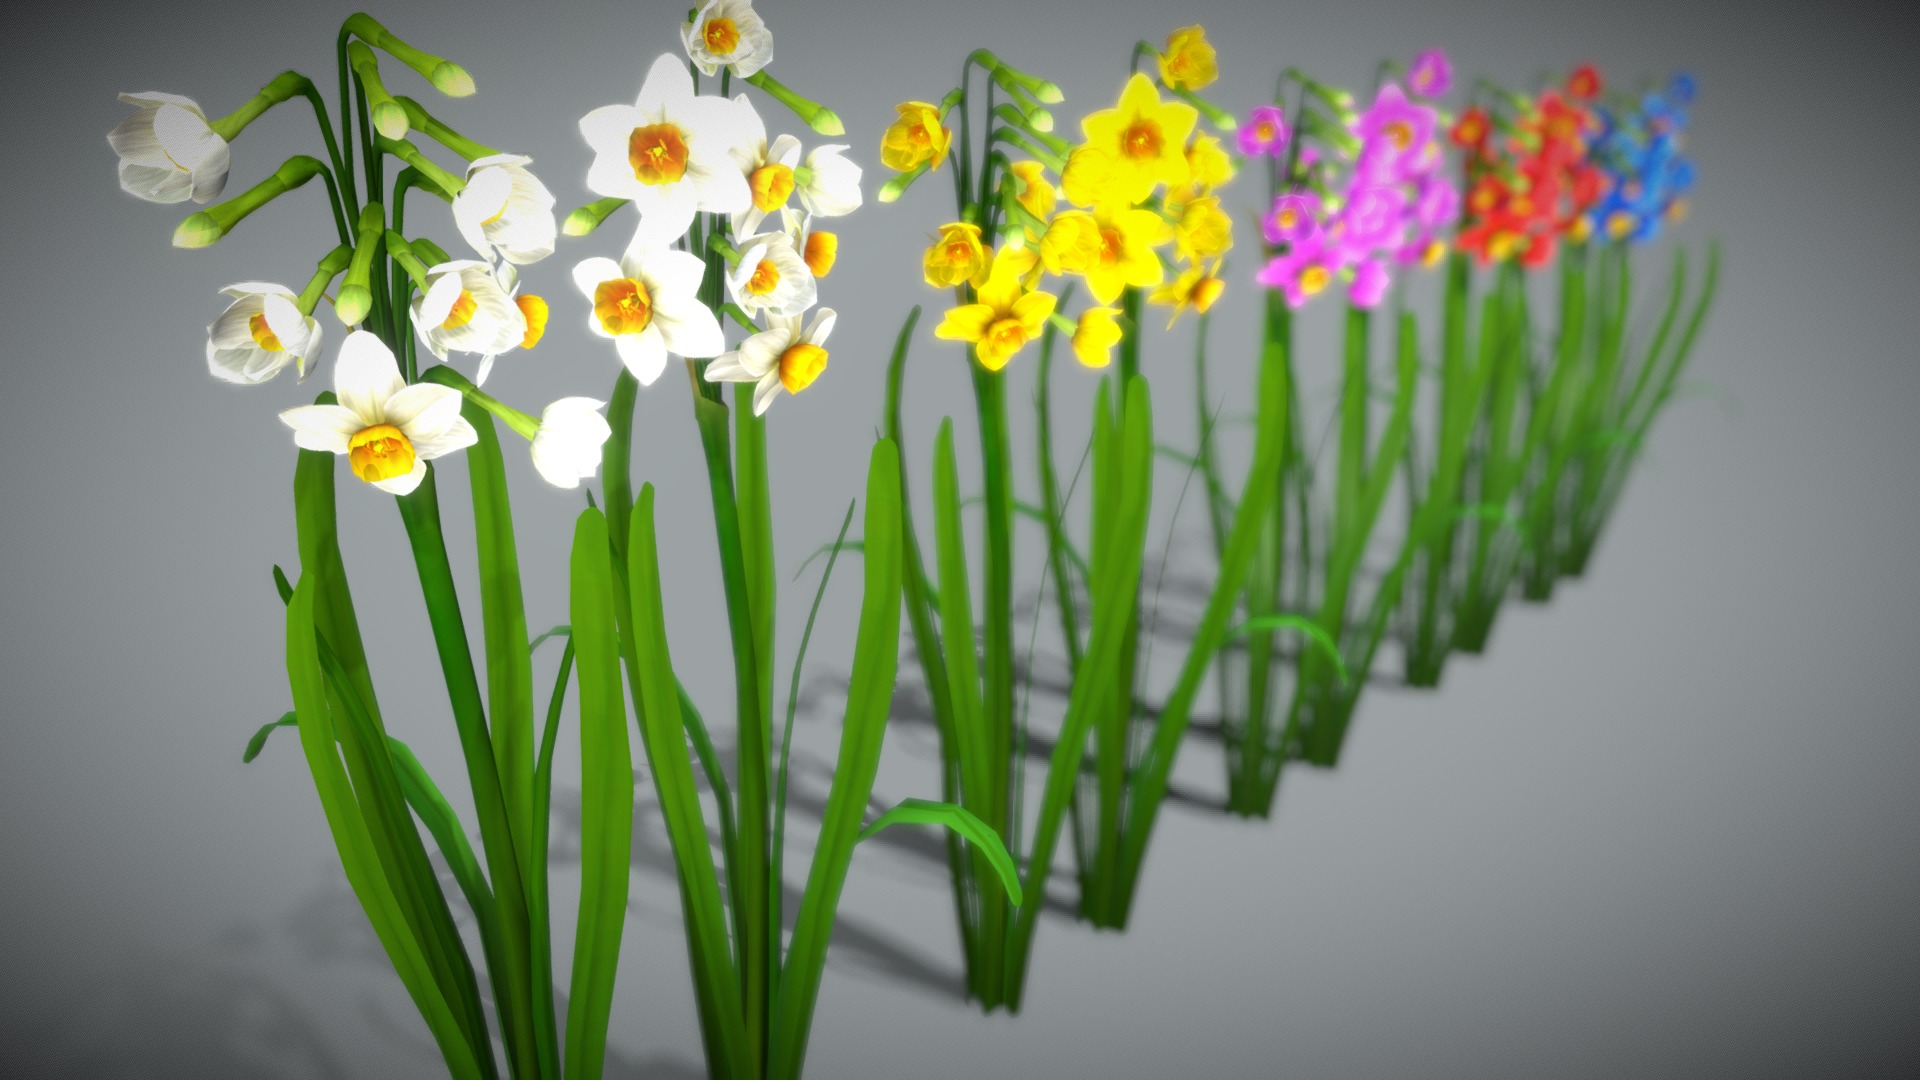 3D model Flower Narcissus Tazetta - This is a 3D model of the Flower Narcissus Tazetta. The 3D model is about a group of flowers.